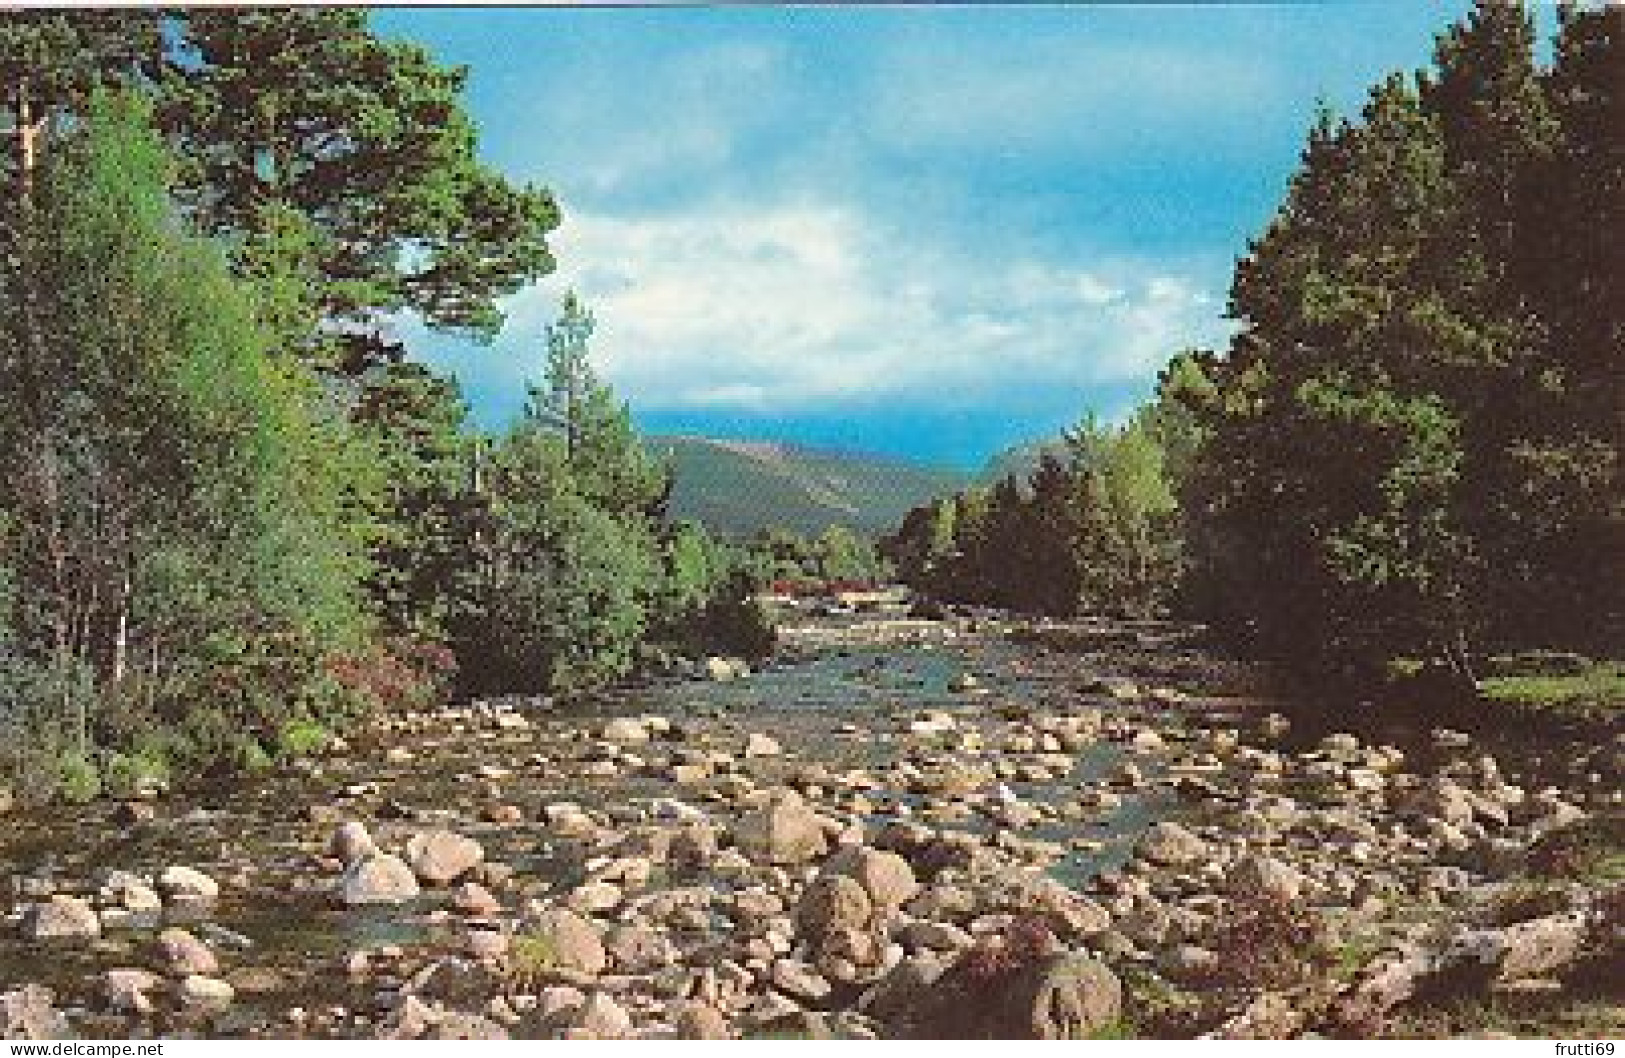 AK 214804 SCOTLAND - Aviemore - On The Lairig Ghru - Inverness-shire